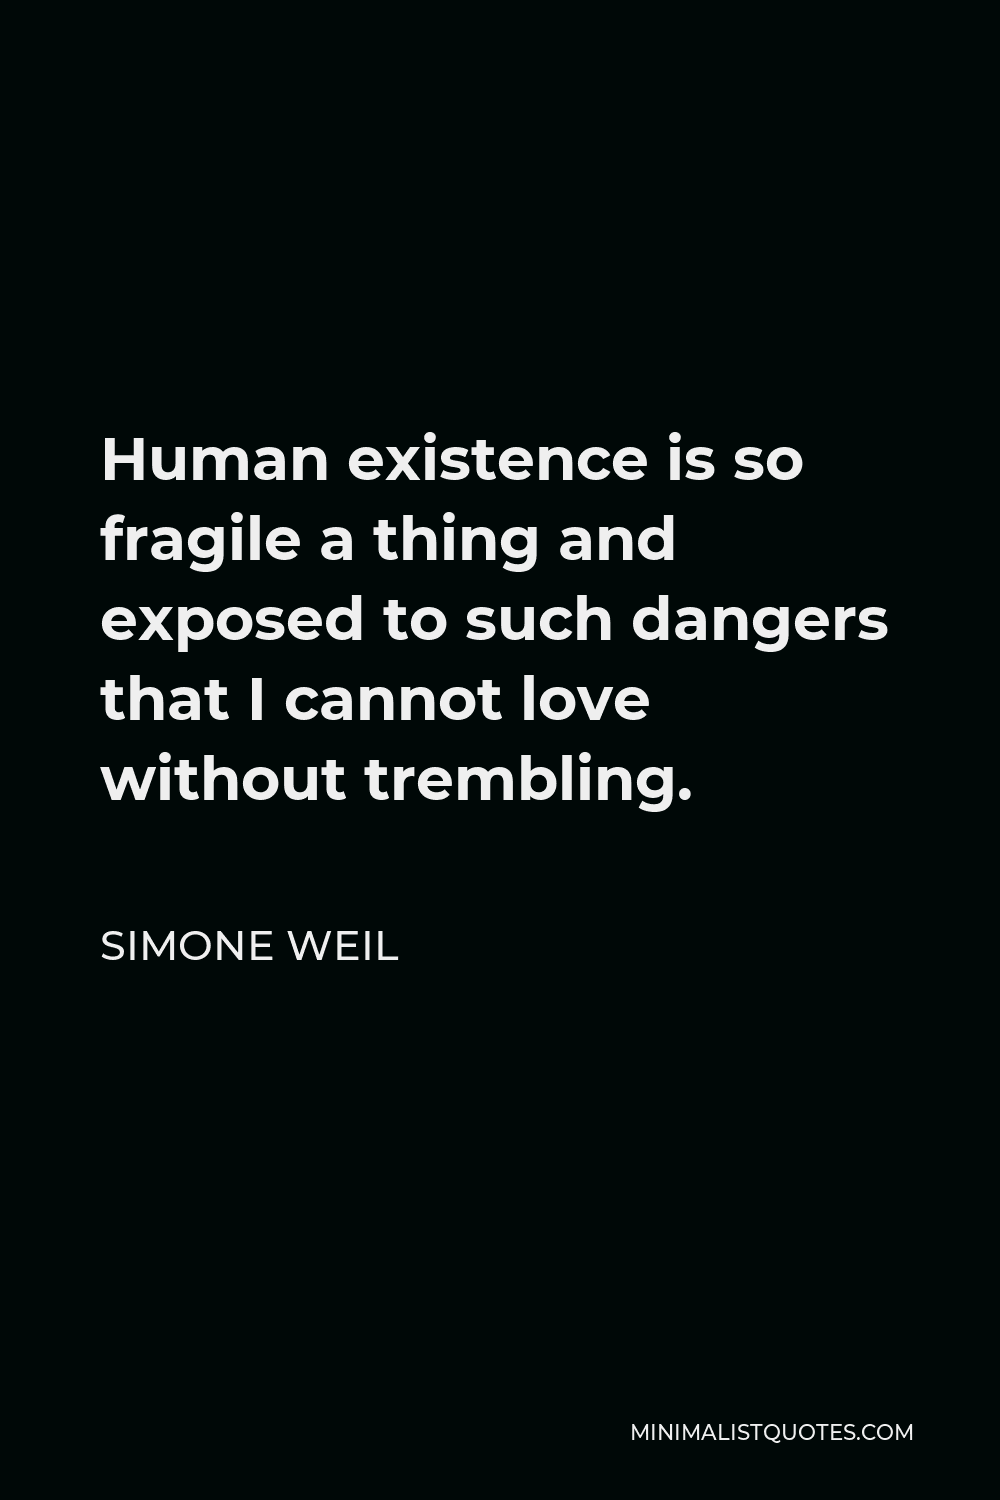 Simone Weil Quote - Human existence is so fragile a thing and exposed to such dangers that I cannot love without trembling.